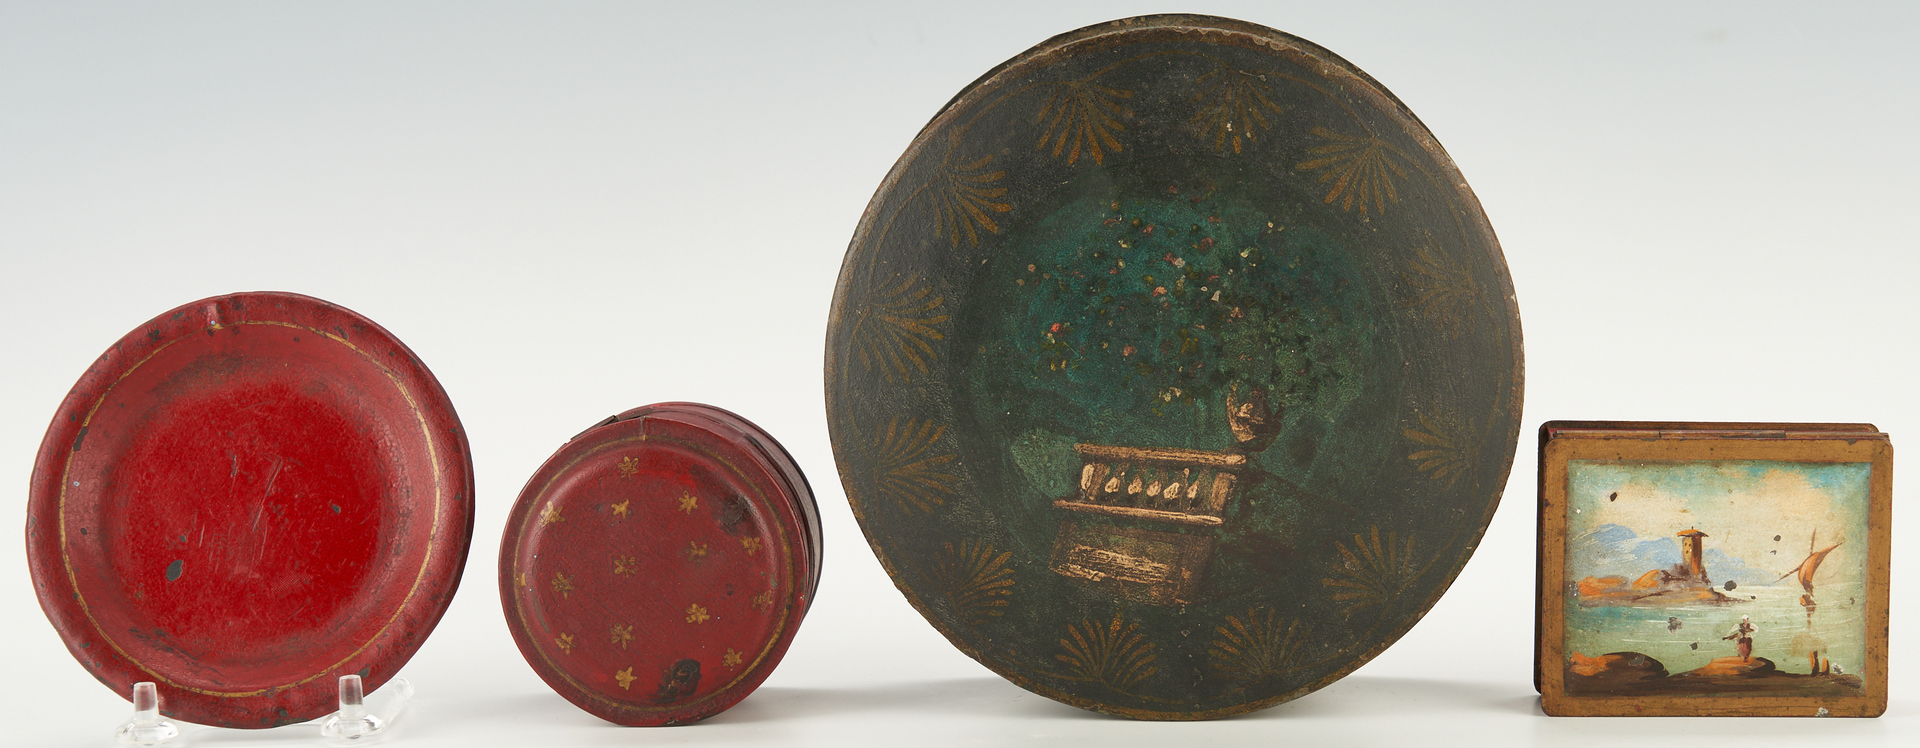 Lot 265: 11 Toleware Containers, incl. Tea Caddies